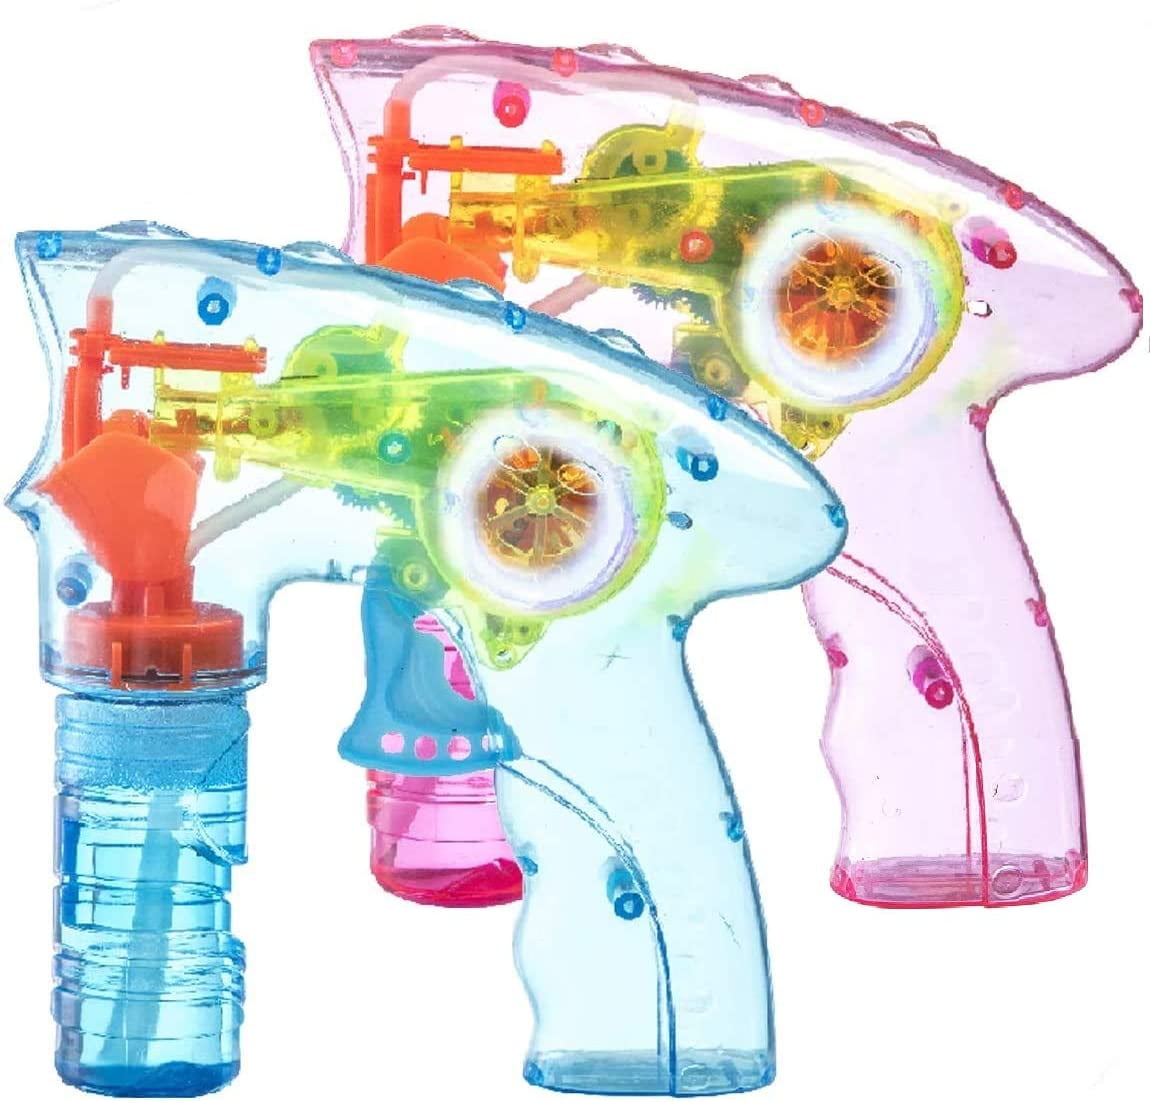 Prextex Wind up Bubble Gun Shooter LED Light up Bubble Blower Indoor and Outdoor Toys for Puppys Kids Boys and Girls no Batteries Needed-pack of 2 Bubble Machine for Kids Bubble